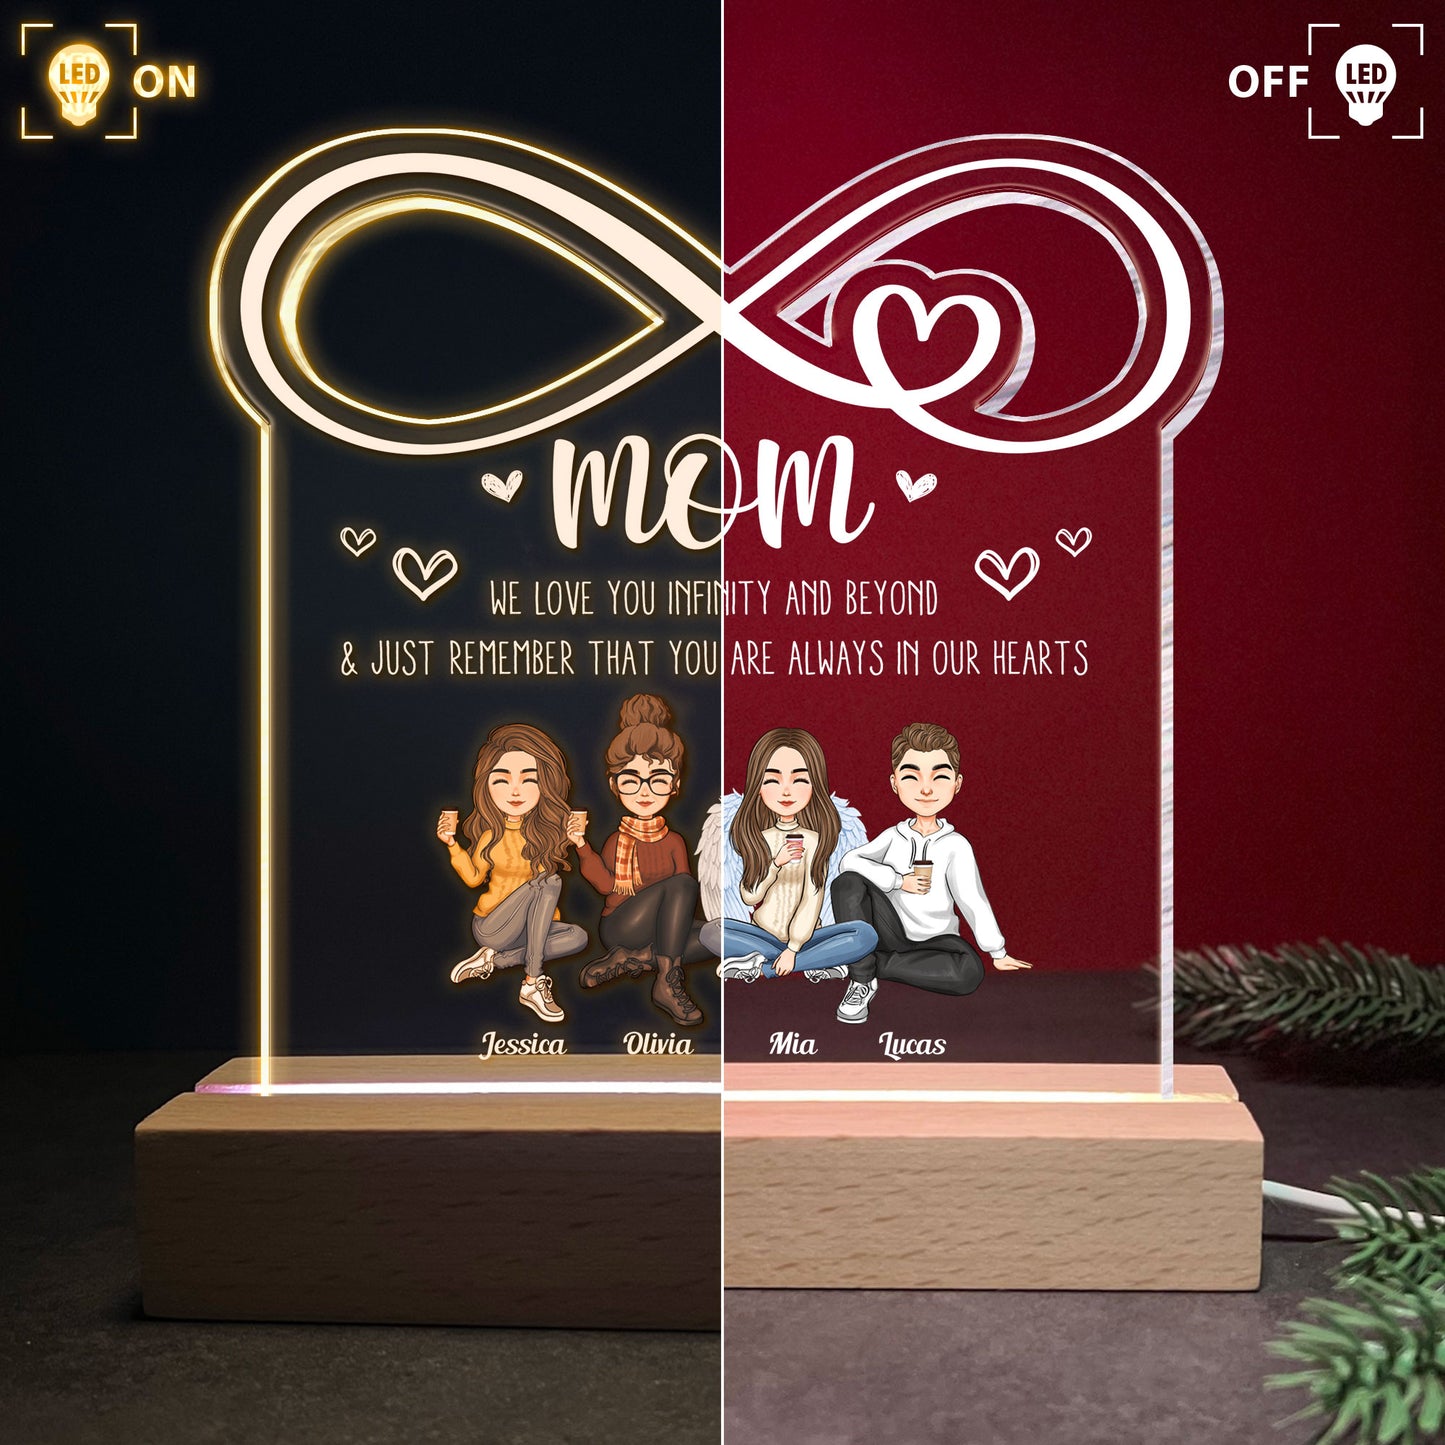 Mom Infinity Love Between Mother & Daughter - Personalized LED Light